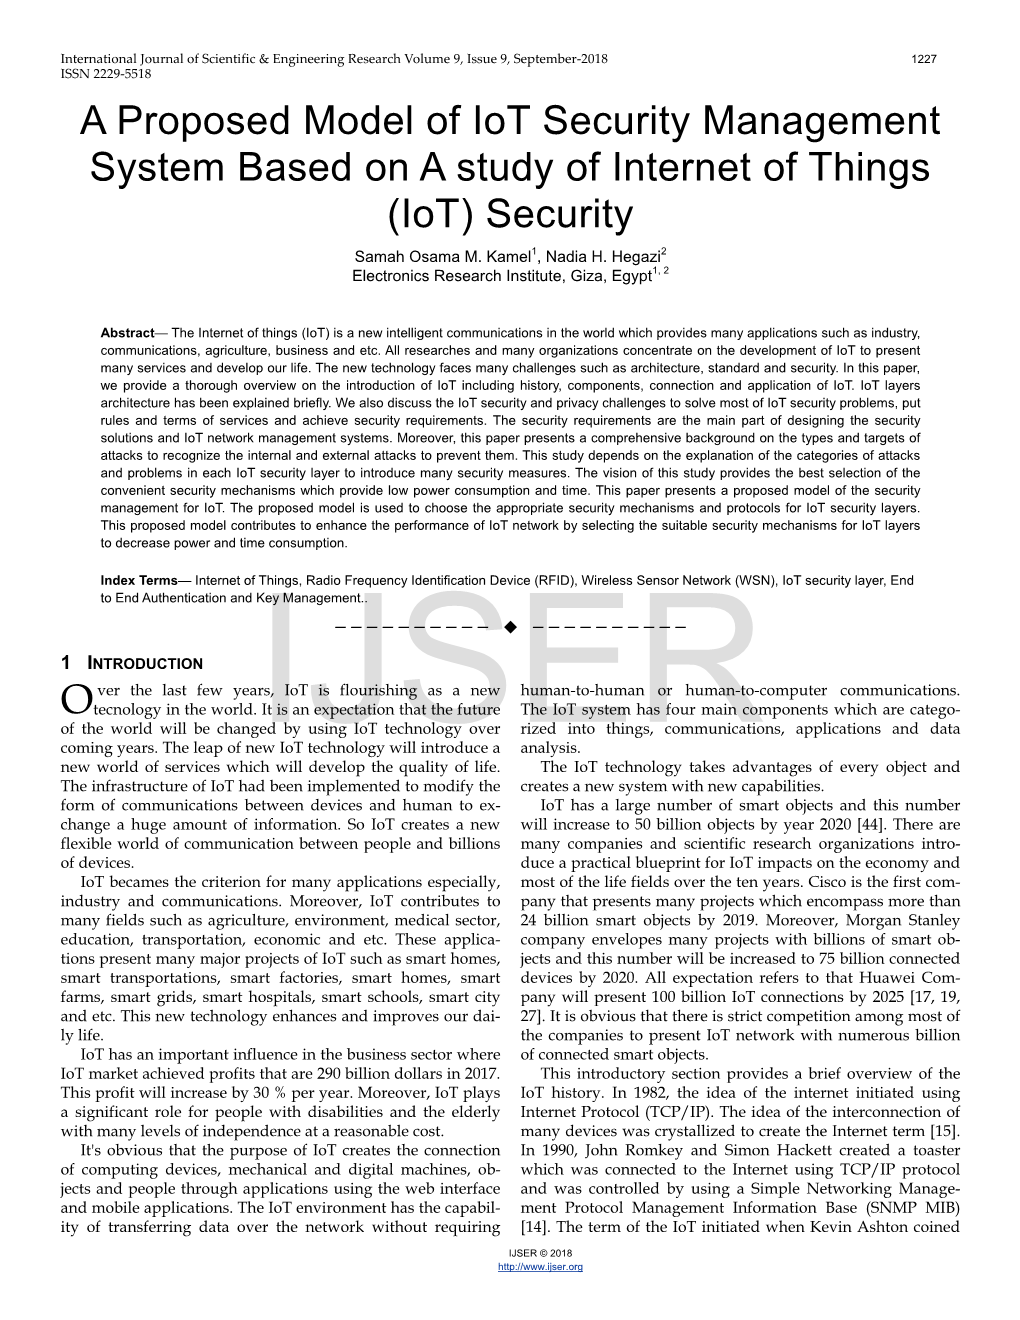 Iot Security Management System Based on a Study of Internet of Things (Iot) Security Samah Osama M